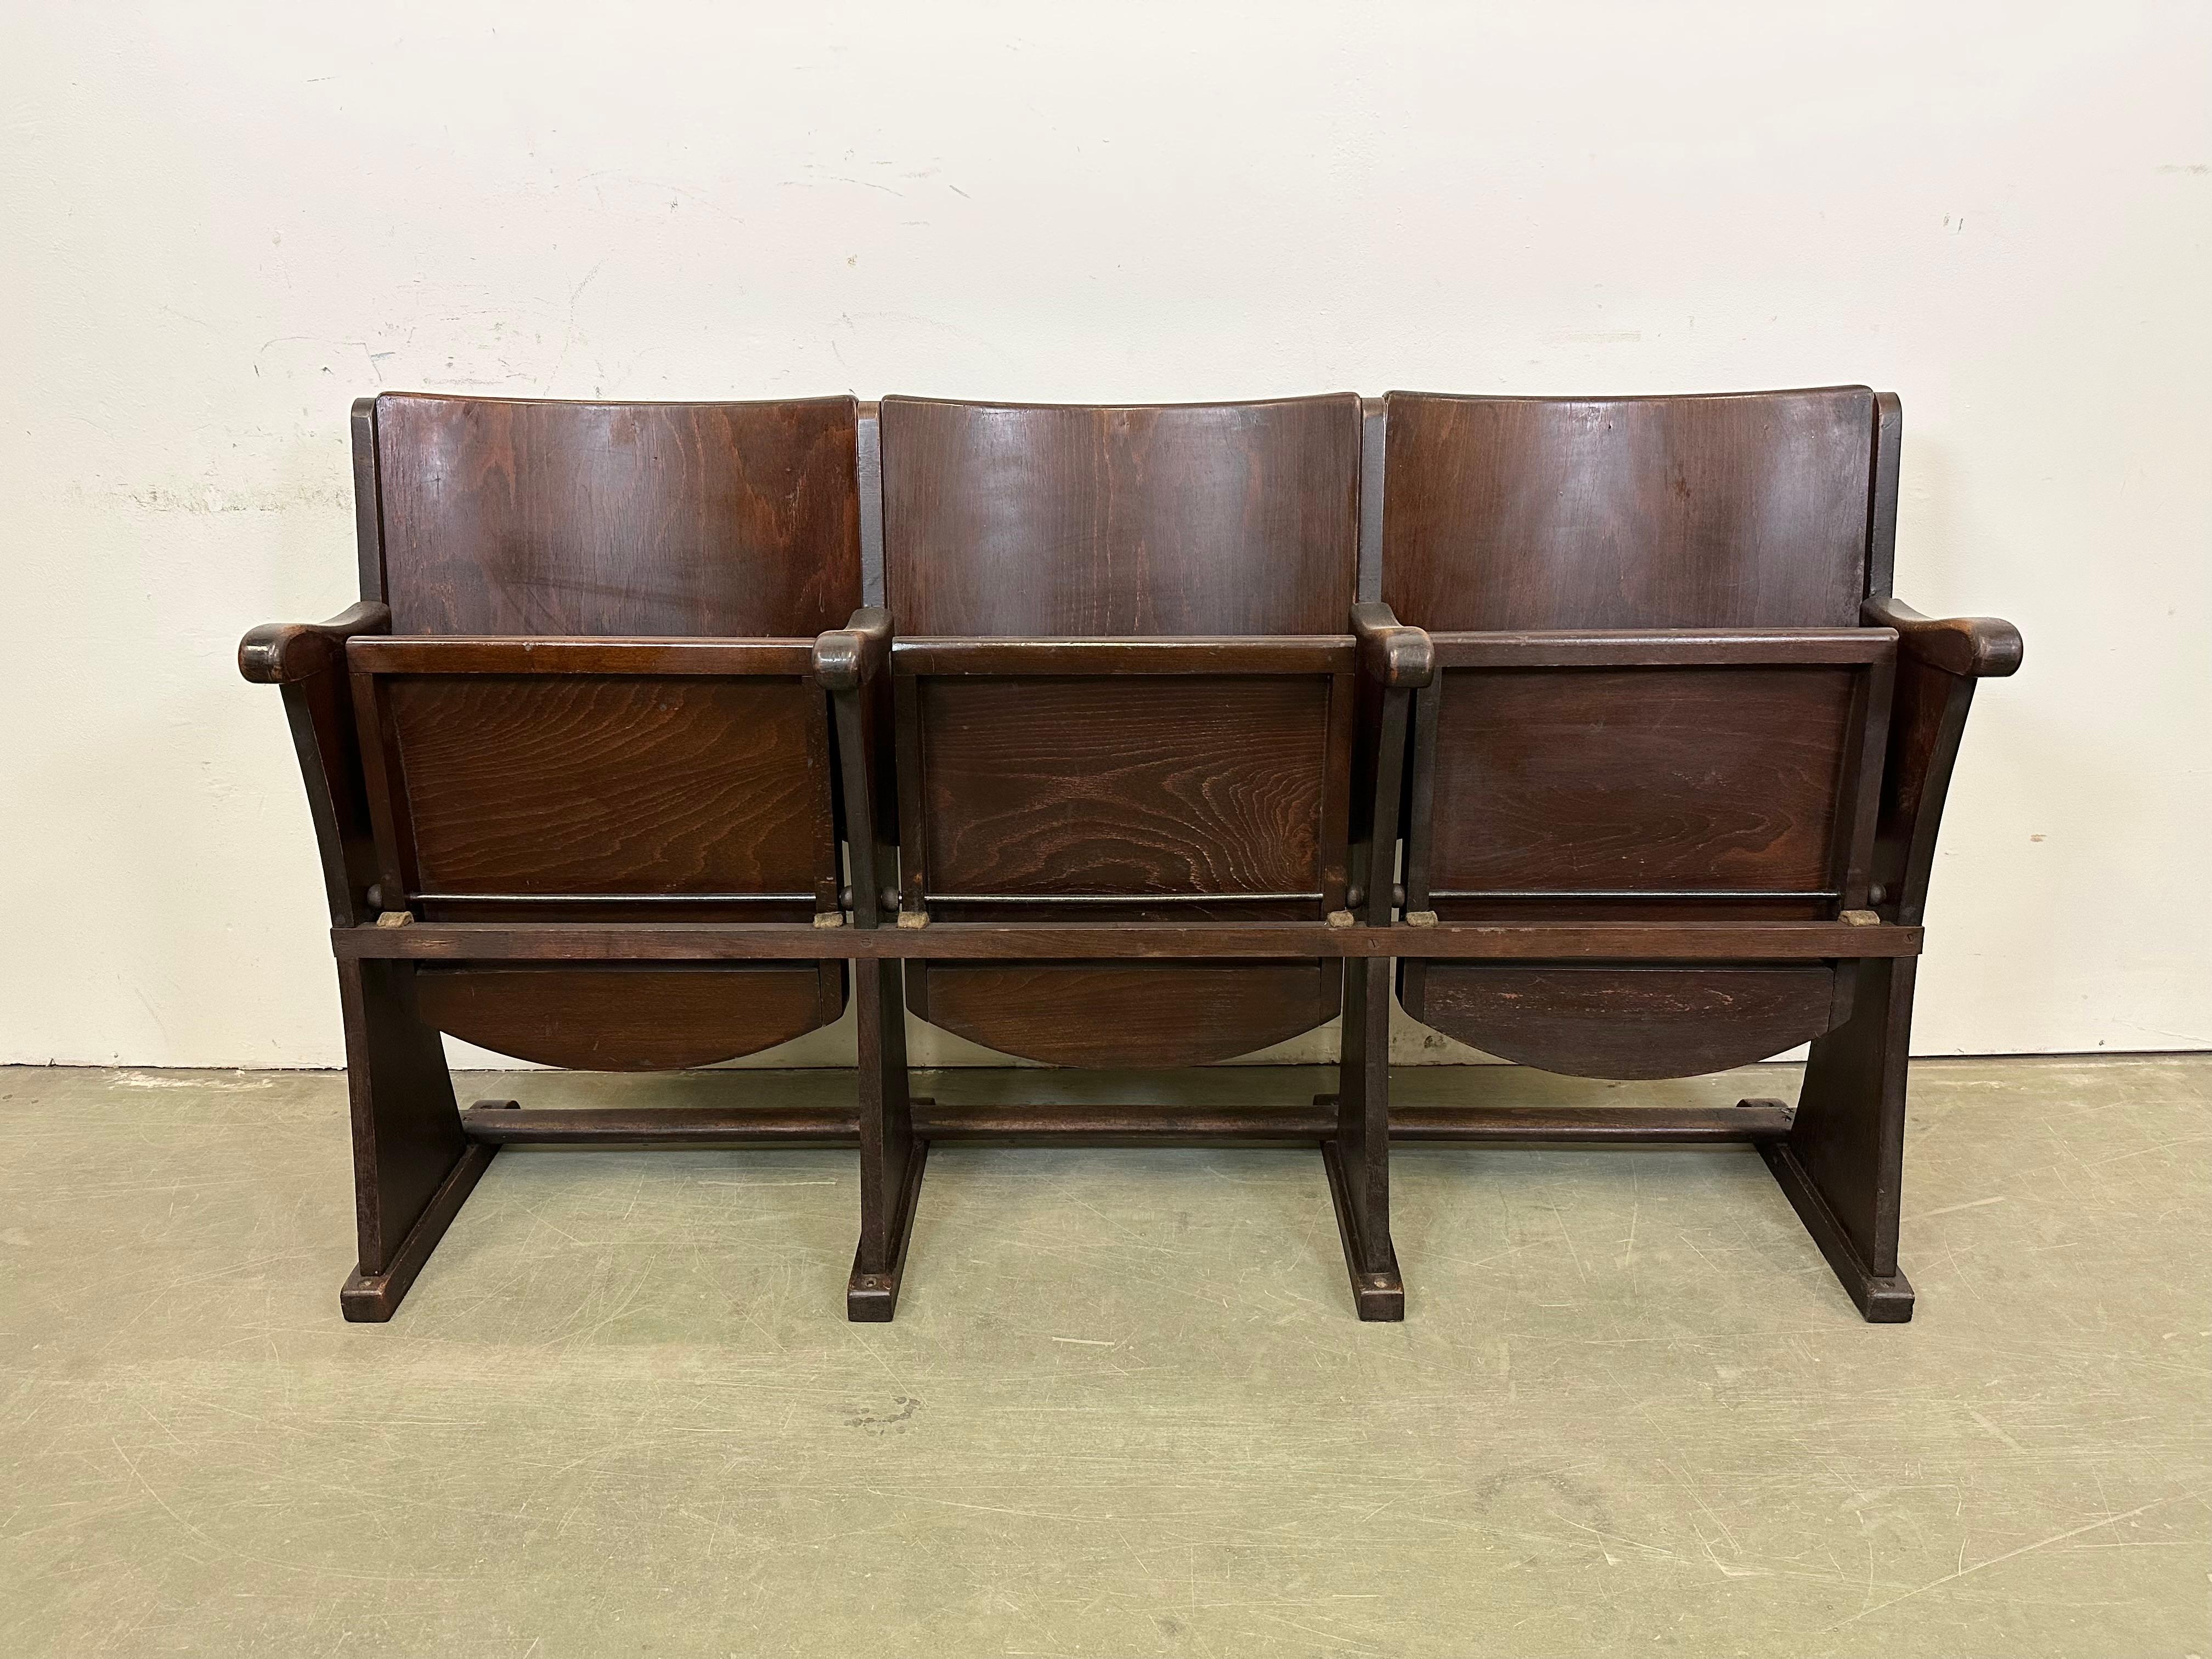 This three-seat cinema bench was produced by Thonet in former Czechoslovakia during the 1930s-1950s. The chairs are stable and can be placed anywhere. It is completely made of wood (partly solid wood, partly plywood). The seats fold upwards. The